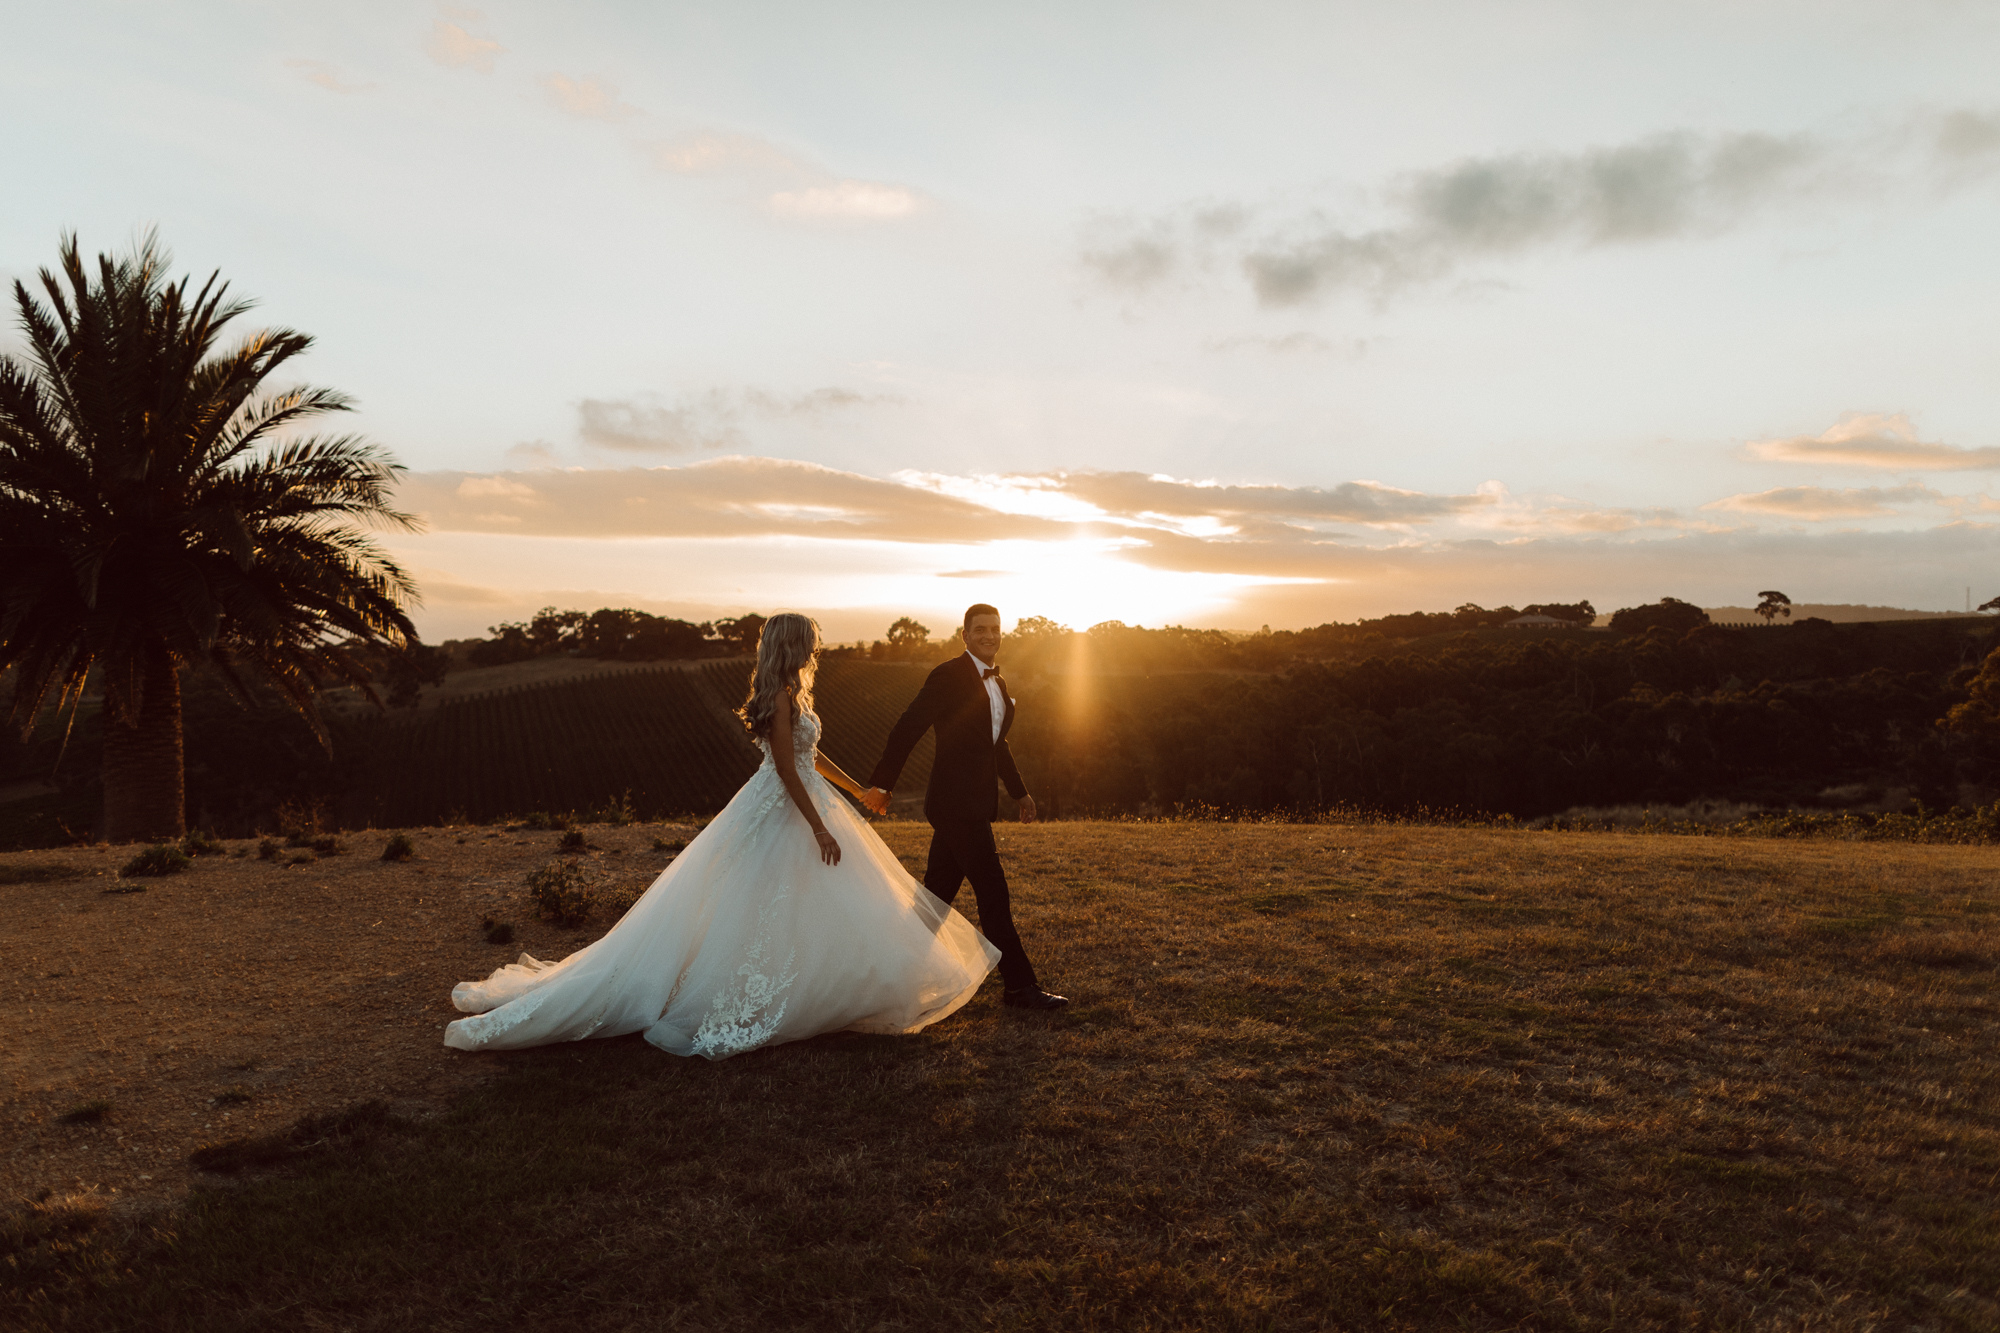 A heritage barn venue set amongst the rolling hills and vineyards of the Adelaide Hills, Longview is a spacious yet intimate wedding venue in Macclesfield with on-site accommodation, day spa and food and beverage packages to suit.